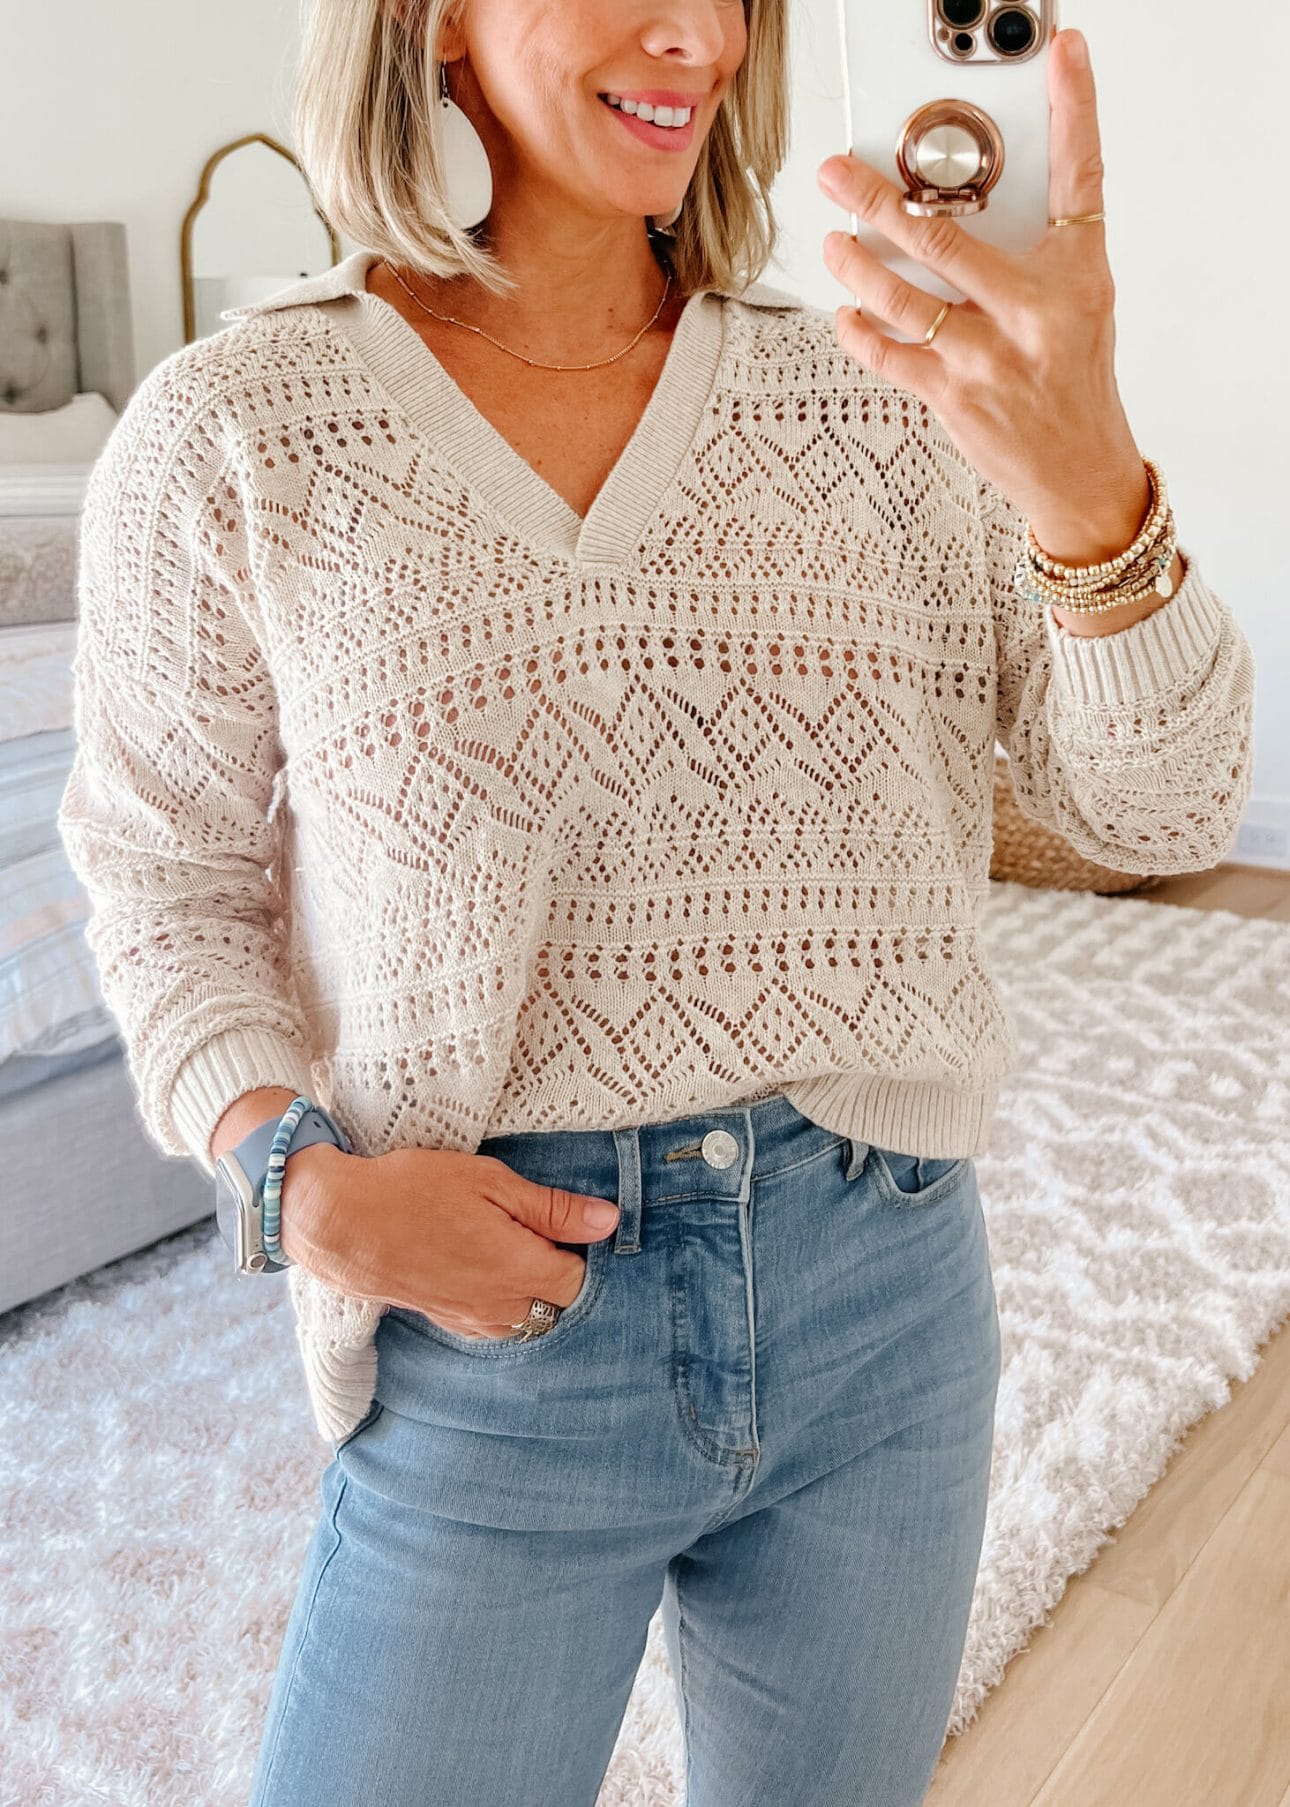 Pointenelle Polo Sweater, Jeans, Wedges 